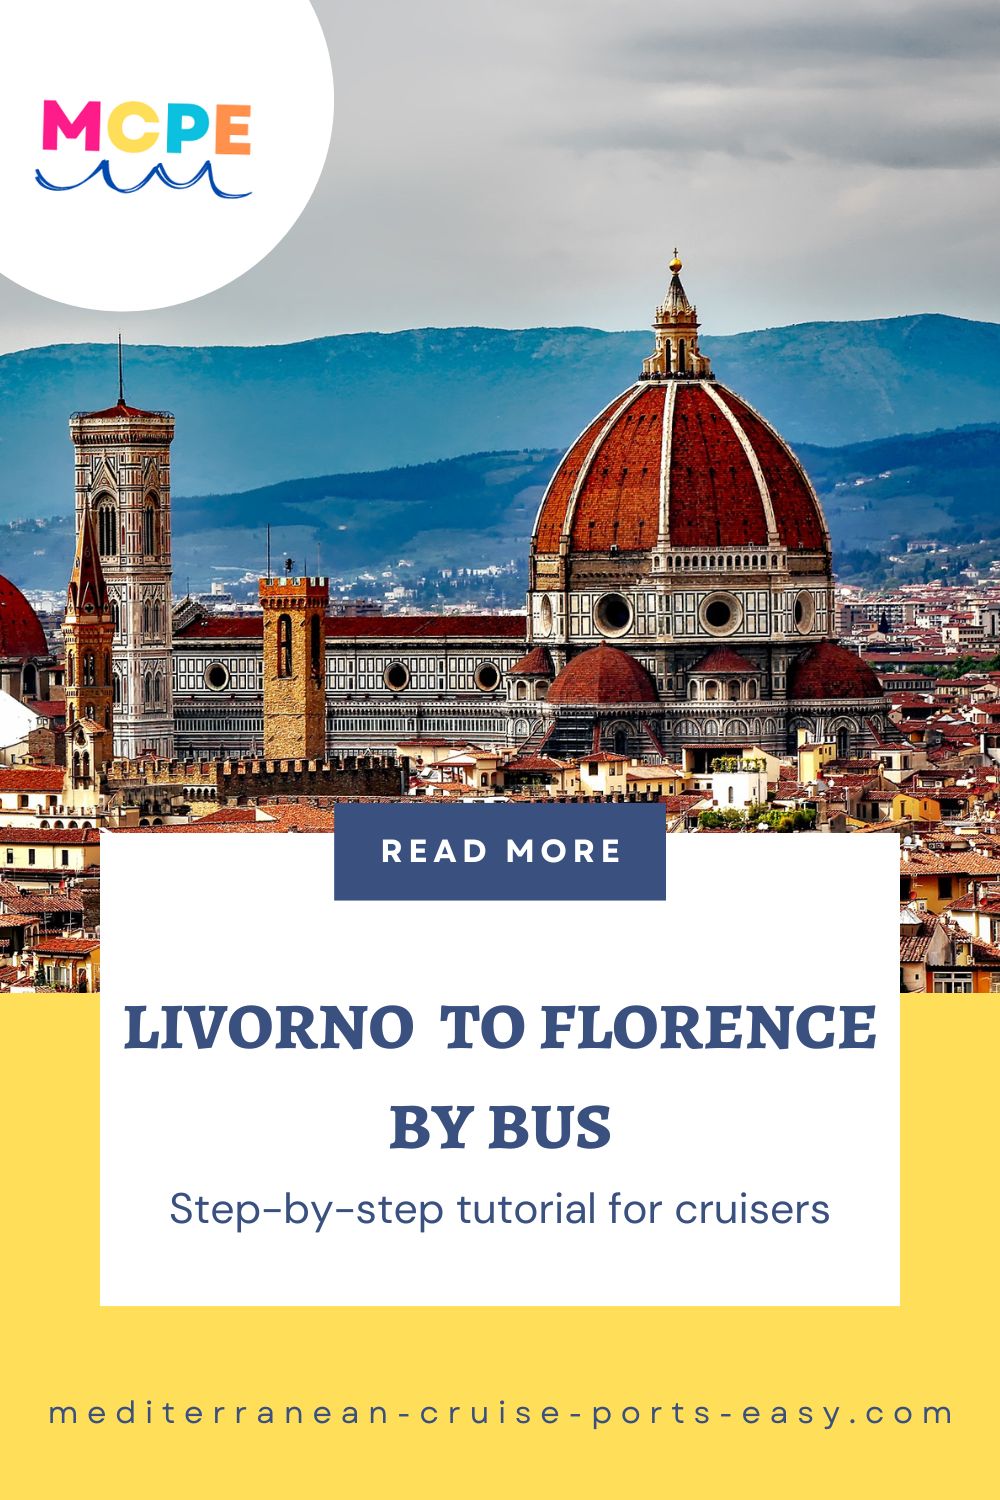 Getting from Livorno to Florence has never been easier with this step by step tutorial. Getting a bus is as convenient as tours and as affordable as trains!